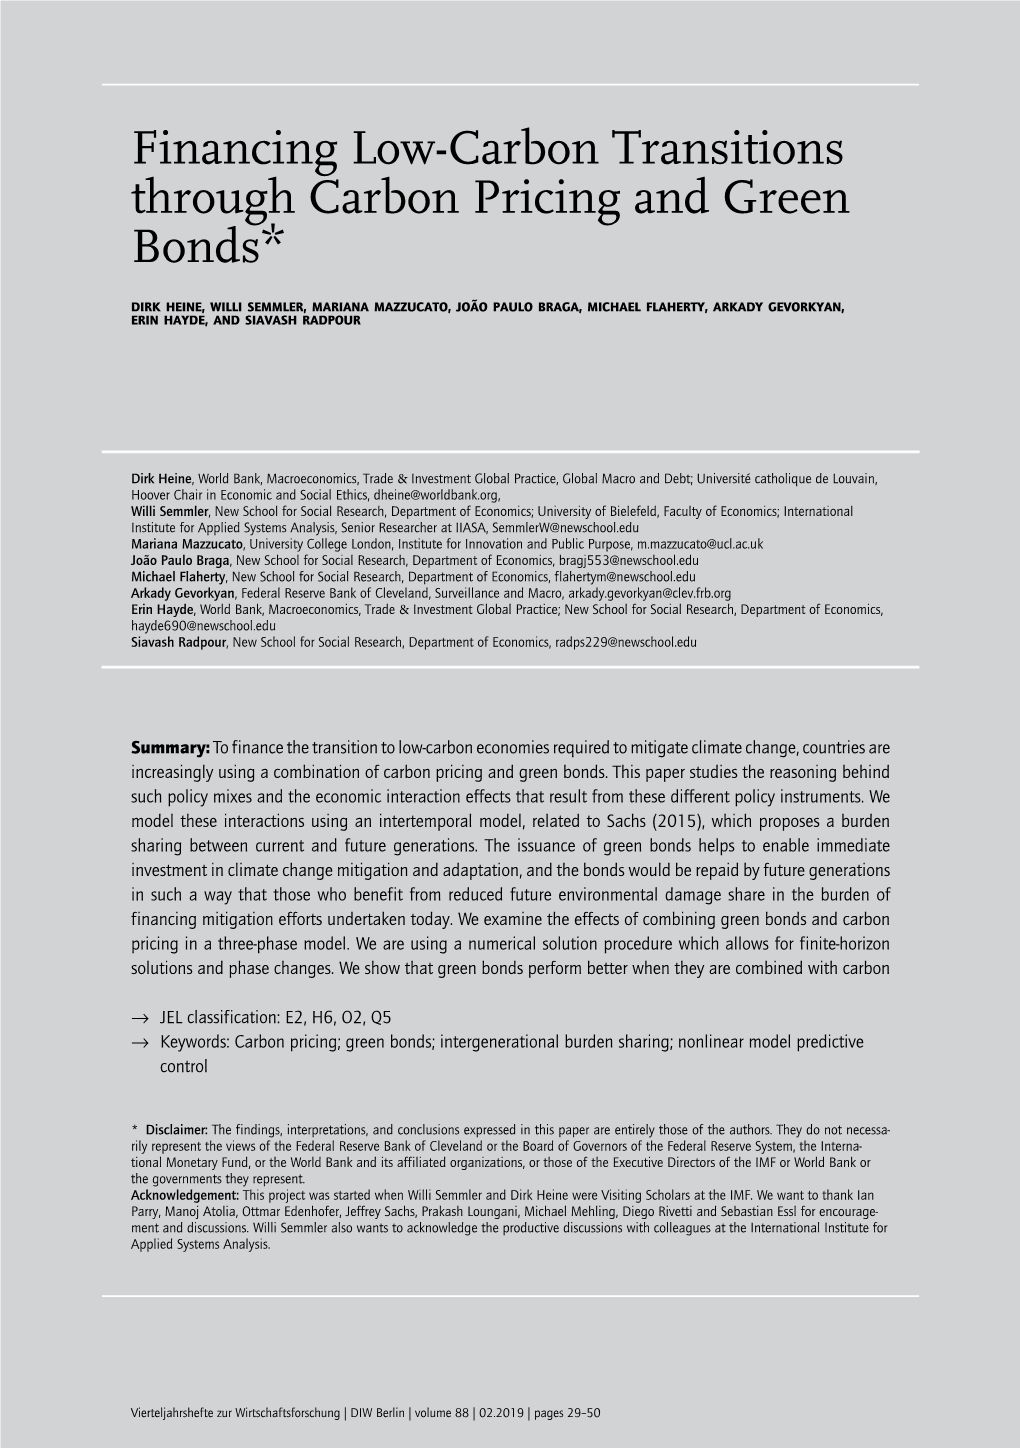 Financing Low-Carbon Transitions Through Carbon Pricing and Green Bonds*